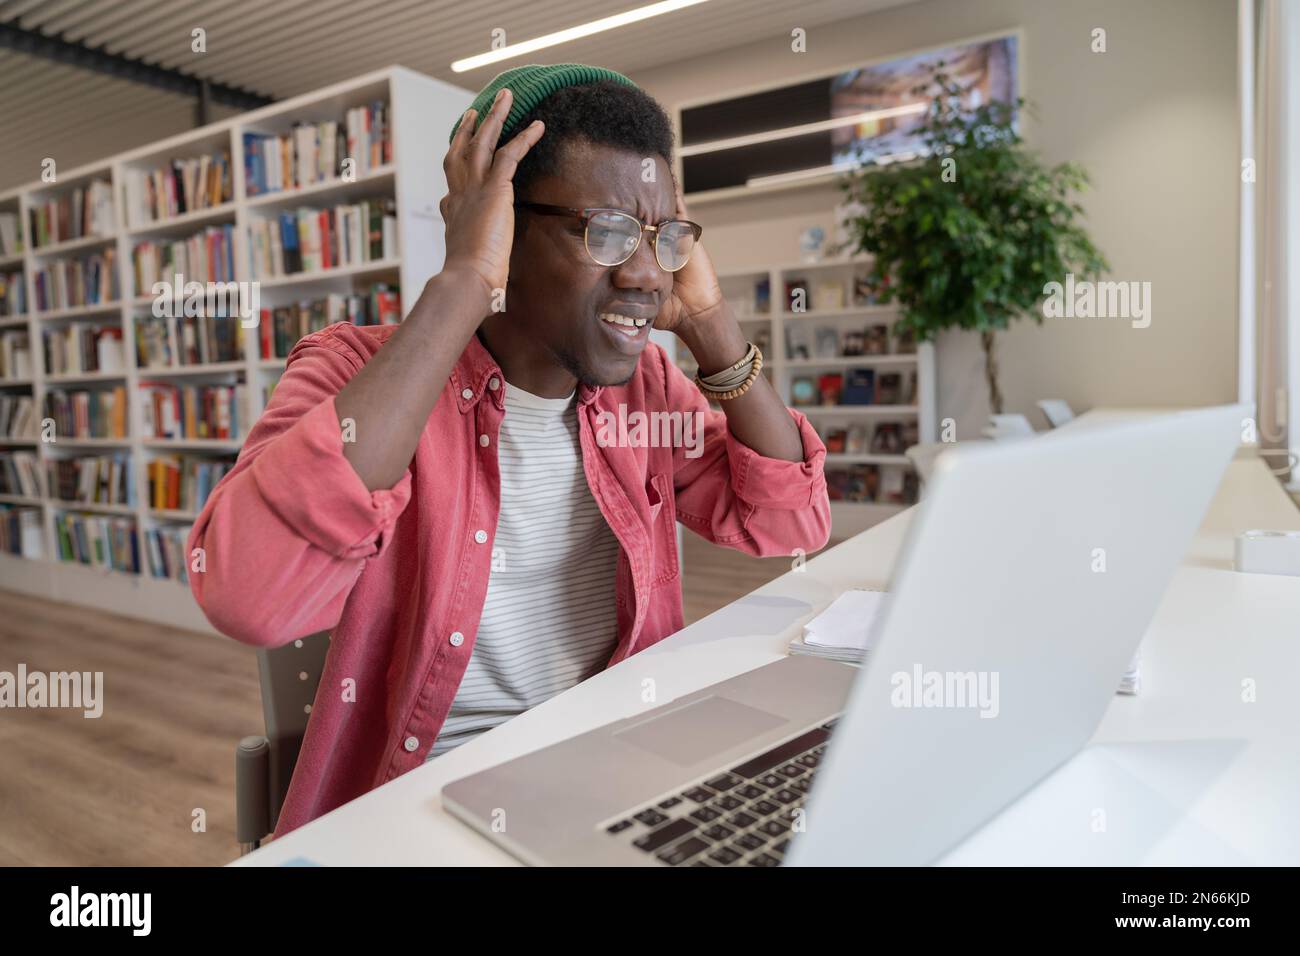 Frustrated student guy in library looking at laptop having tech problems during online learning Stock Photo